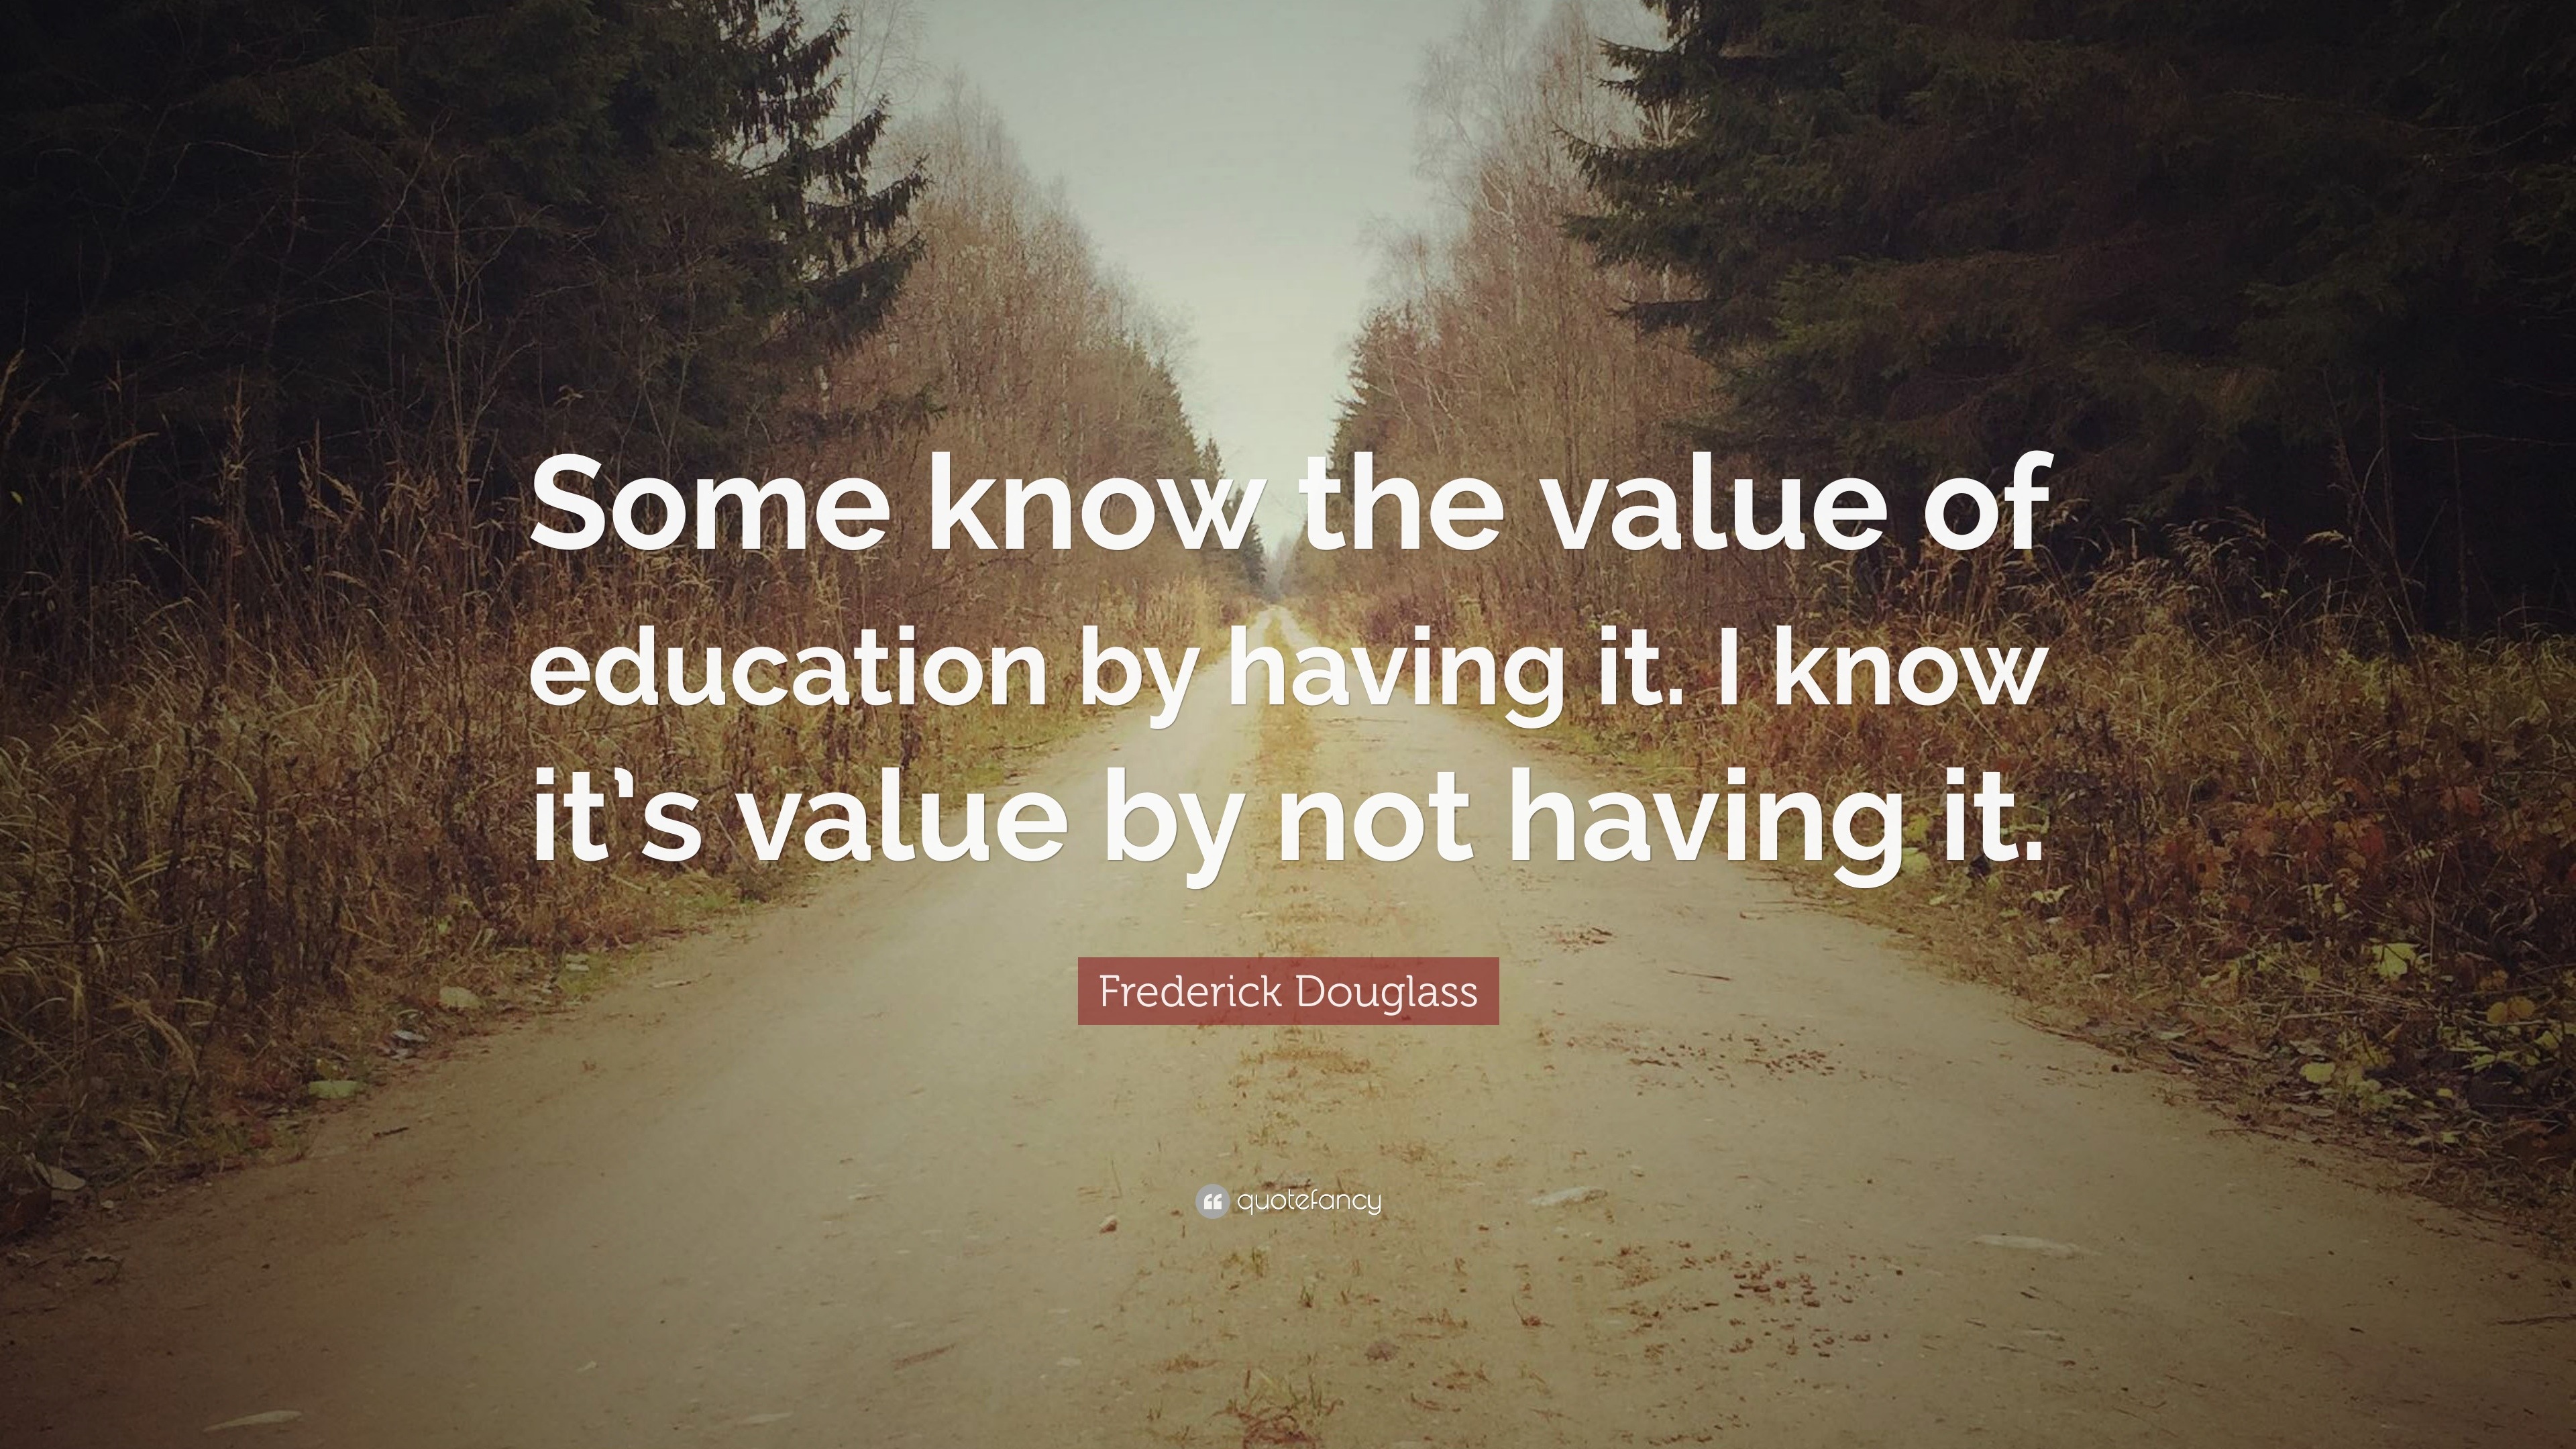 Frederick Douglass Quote: “Some know the value of education by having